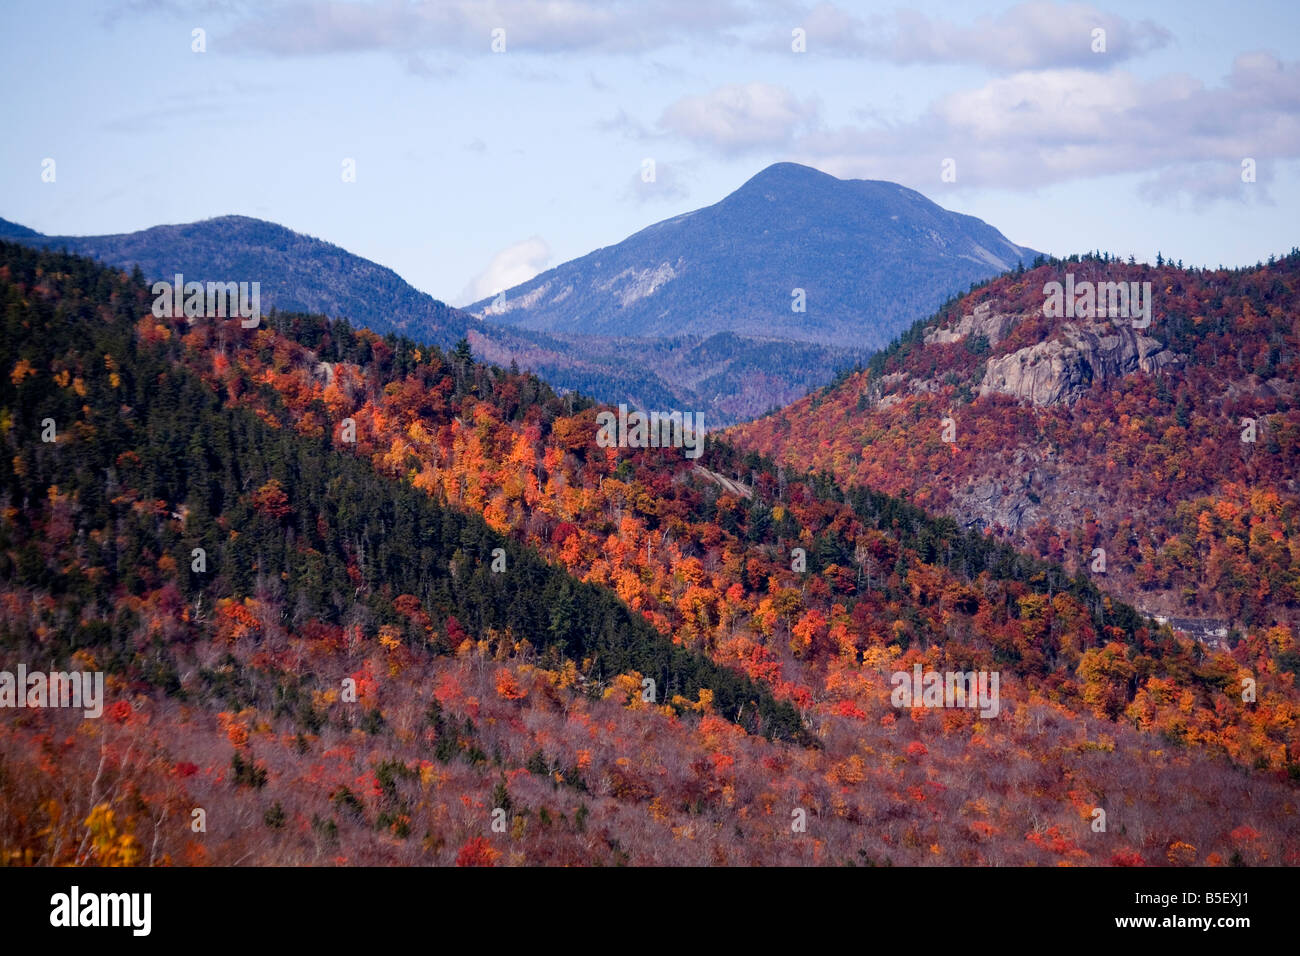 A view from the Kankamagus Highway in New Hampshire, showing trees in full autumn colors and a distant mountain. Stock Photo